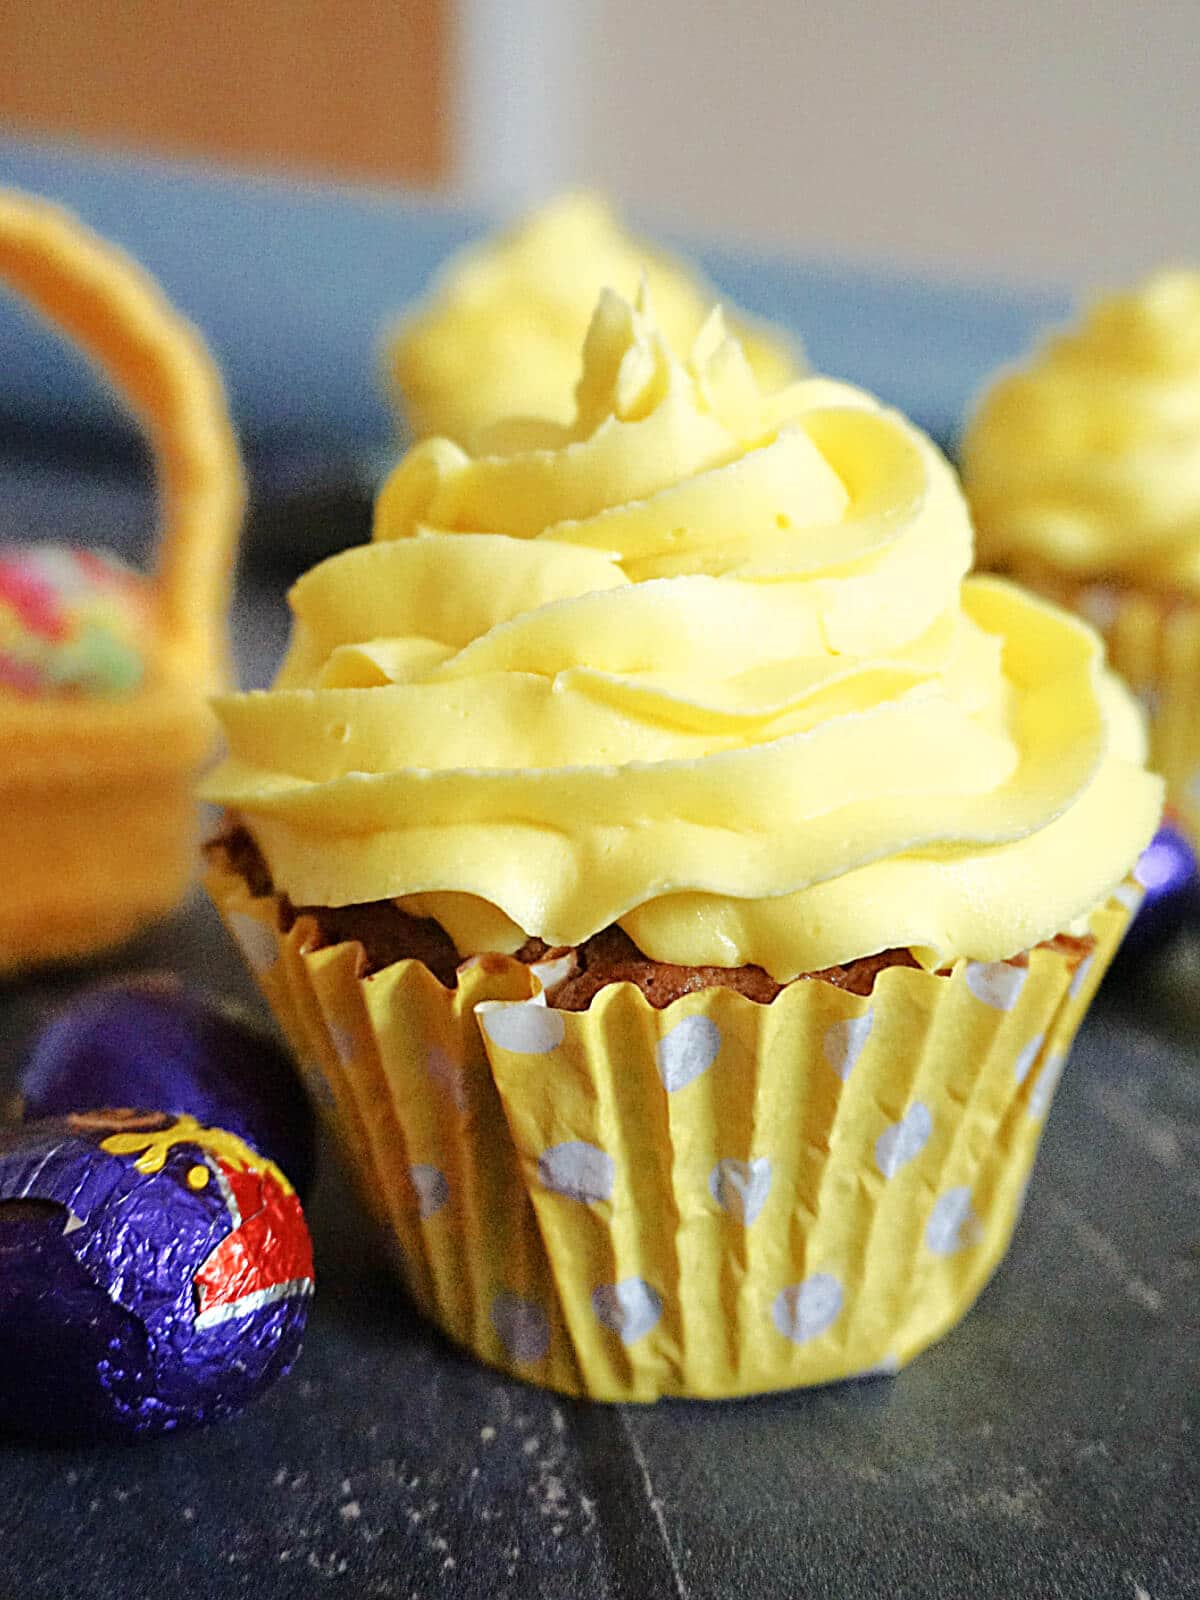 A creme egg cupcake topped with lemon buttercream and creme eggs around it